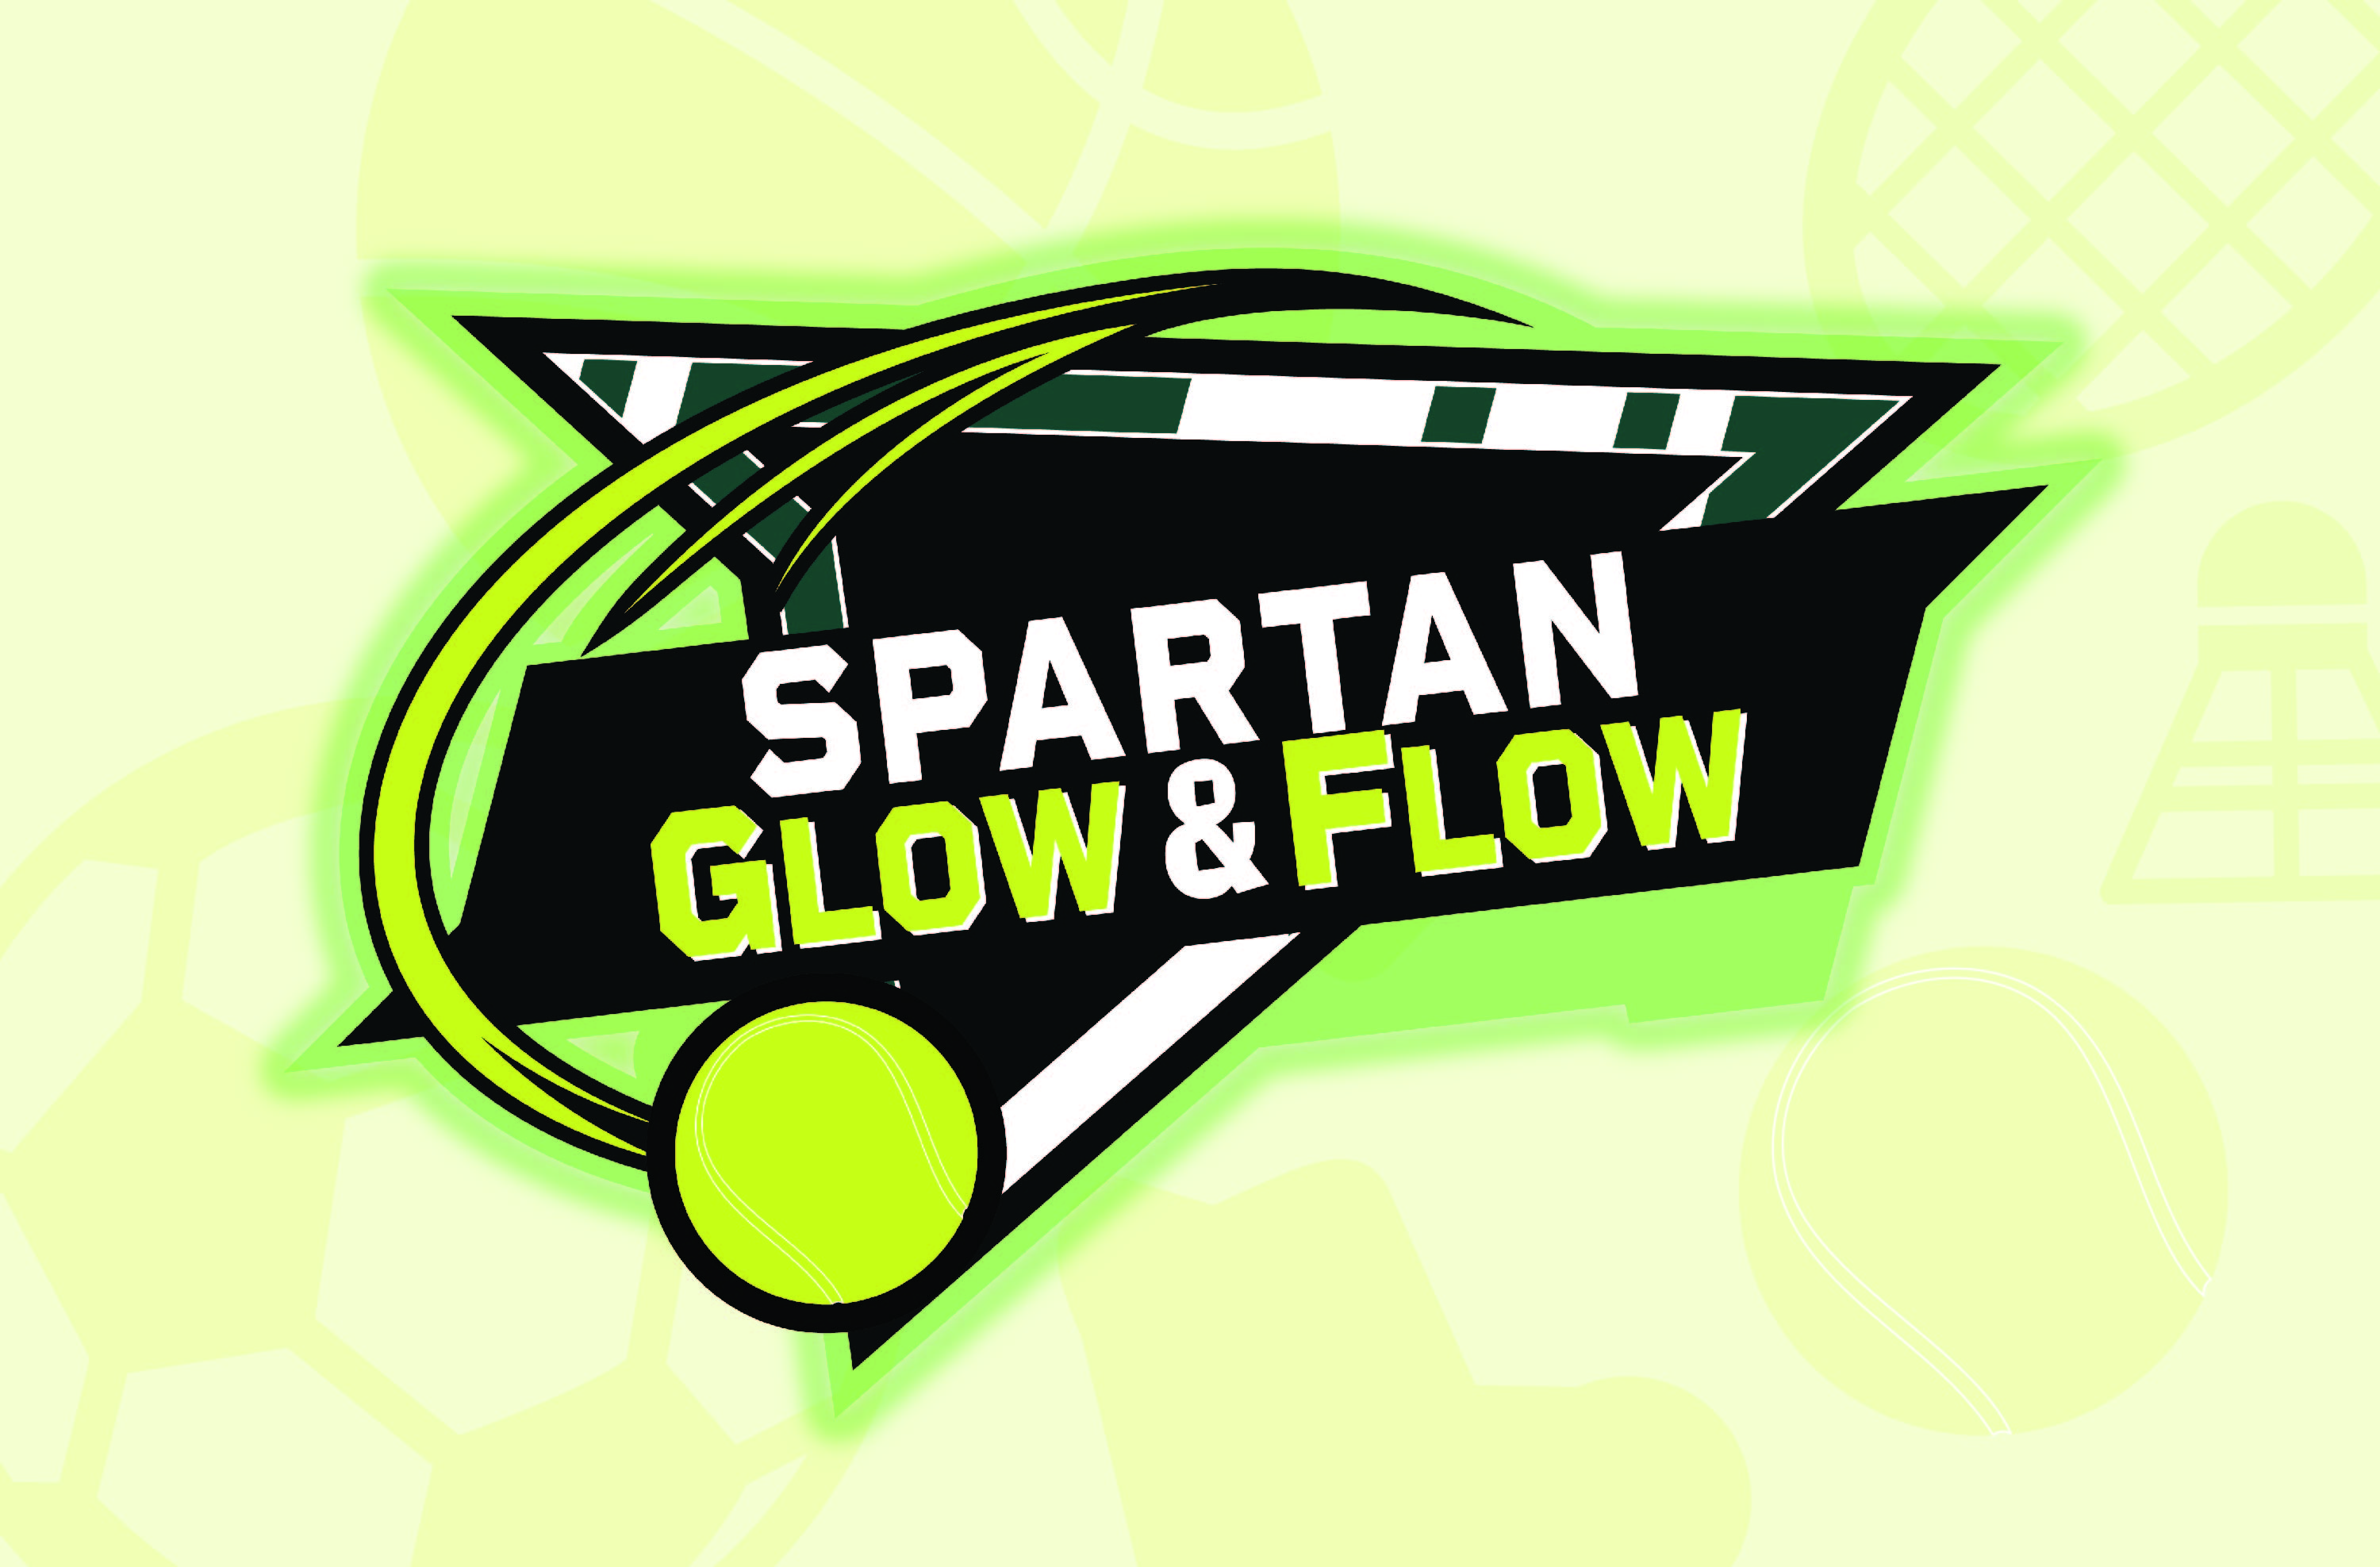 Spartan Glow and Flow